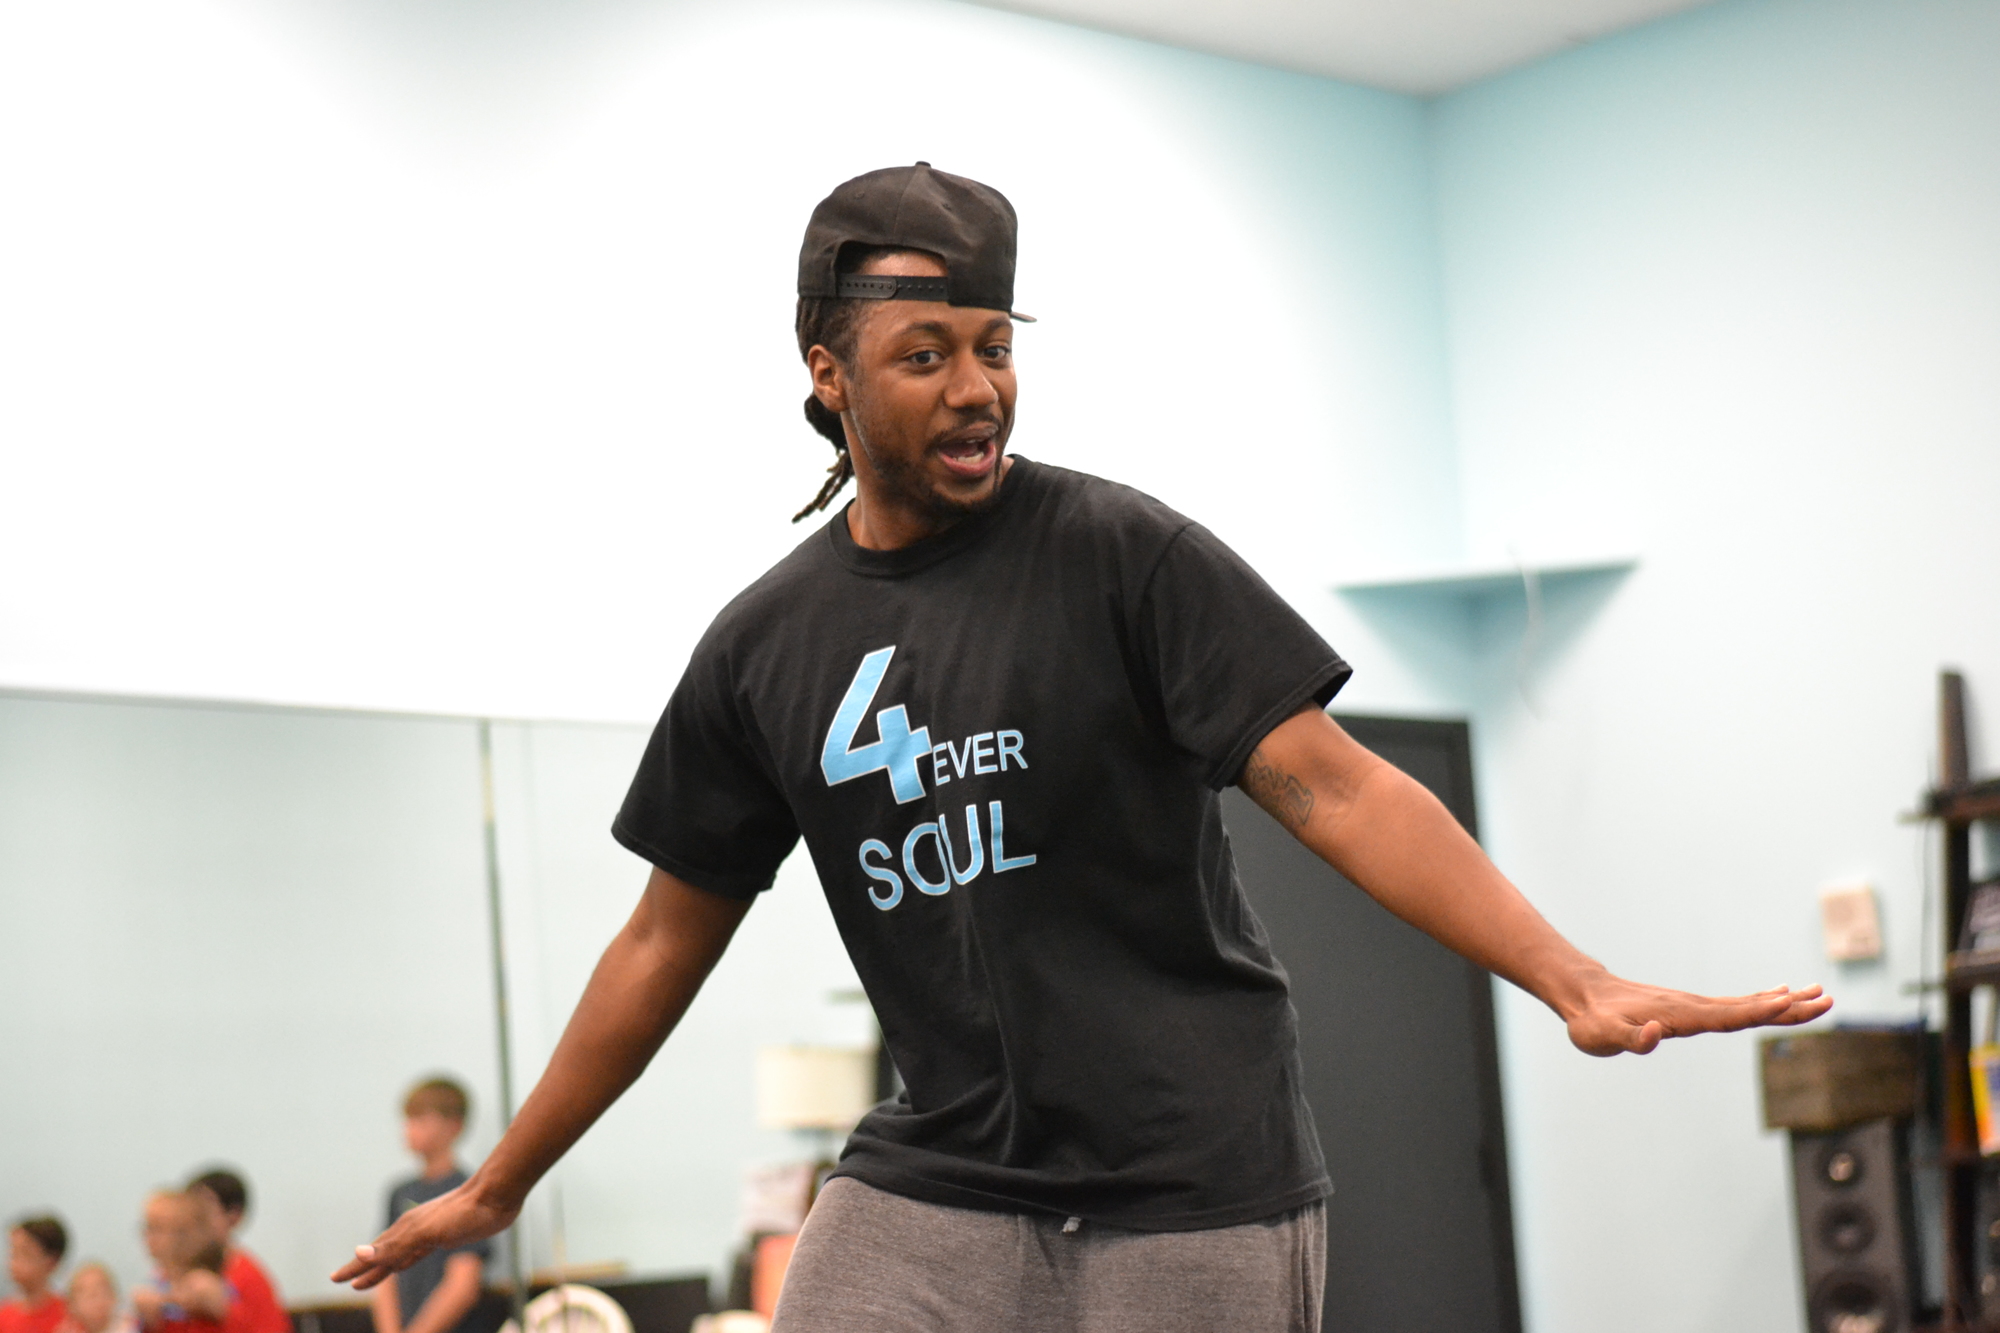 Kris Powell is going into his second season as an instructor at Soul Studios.